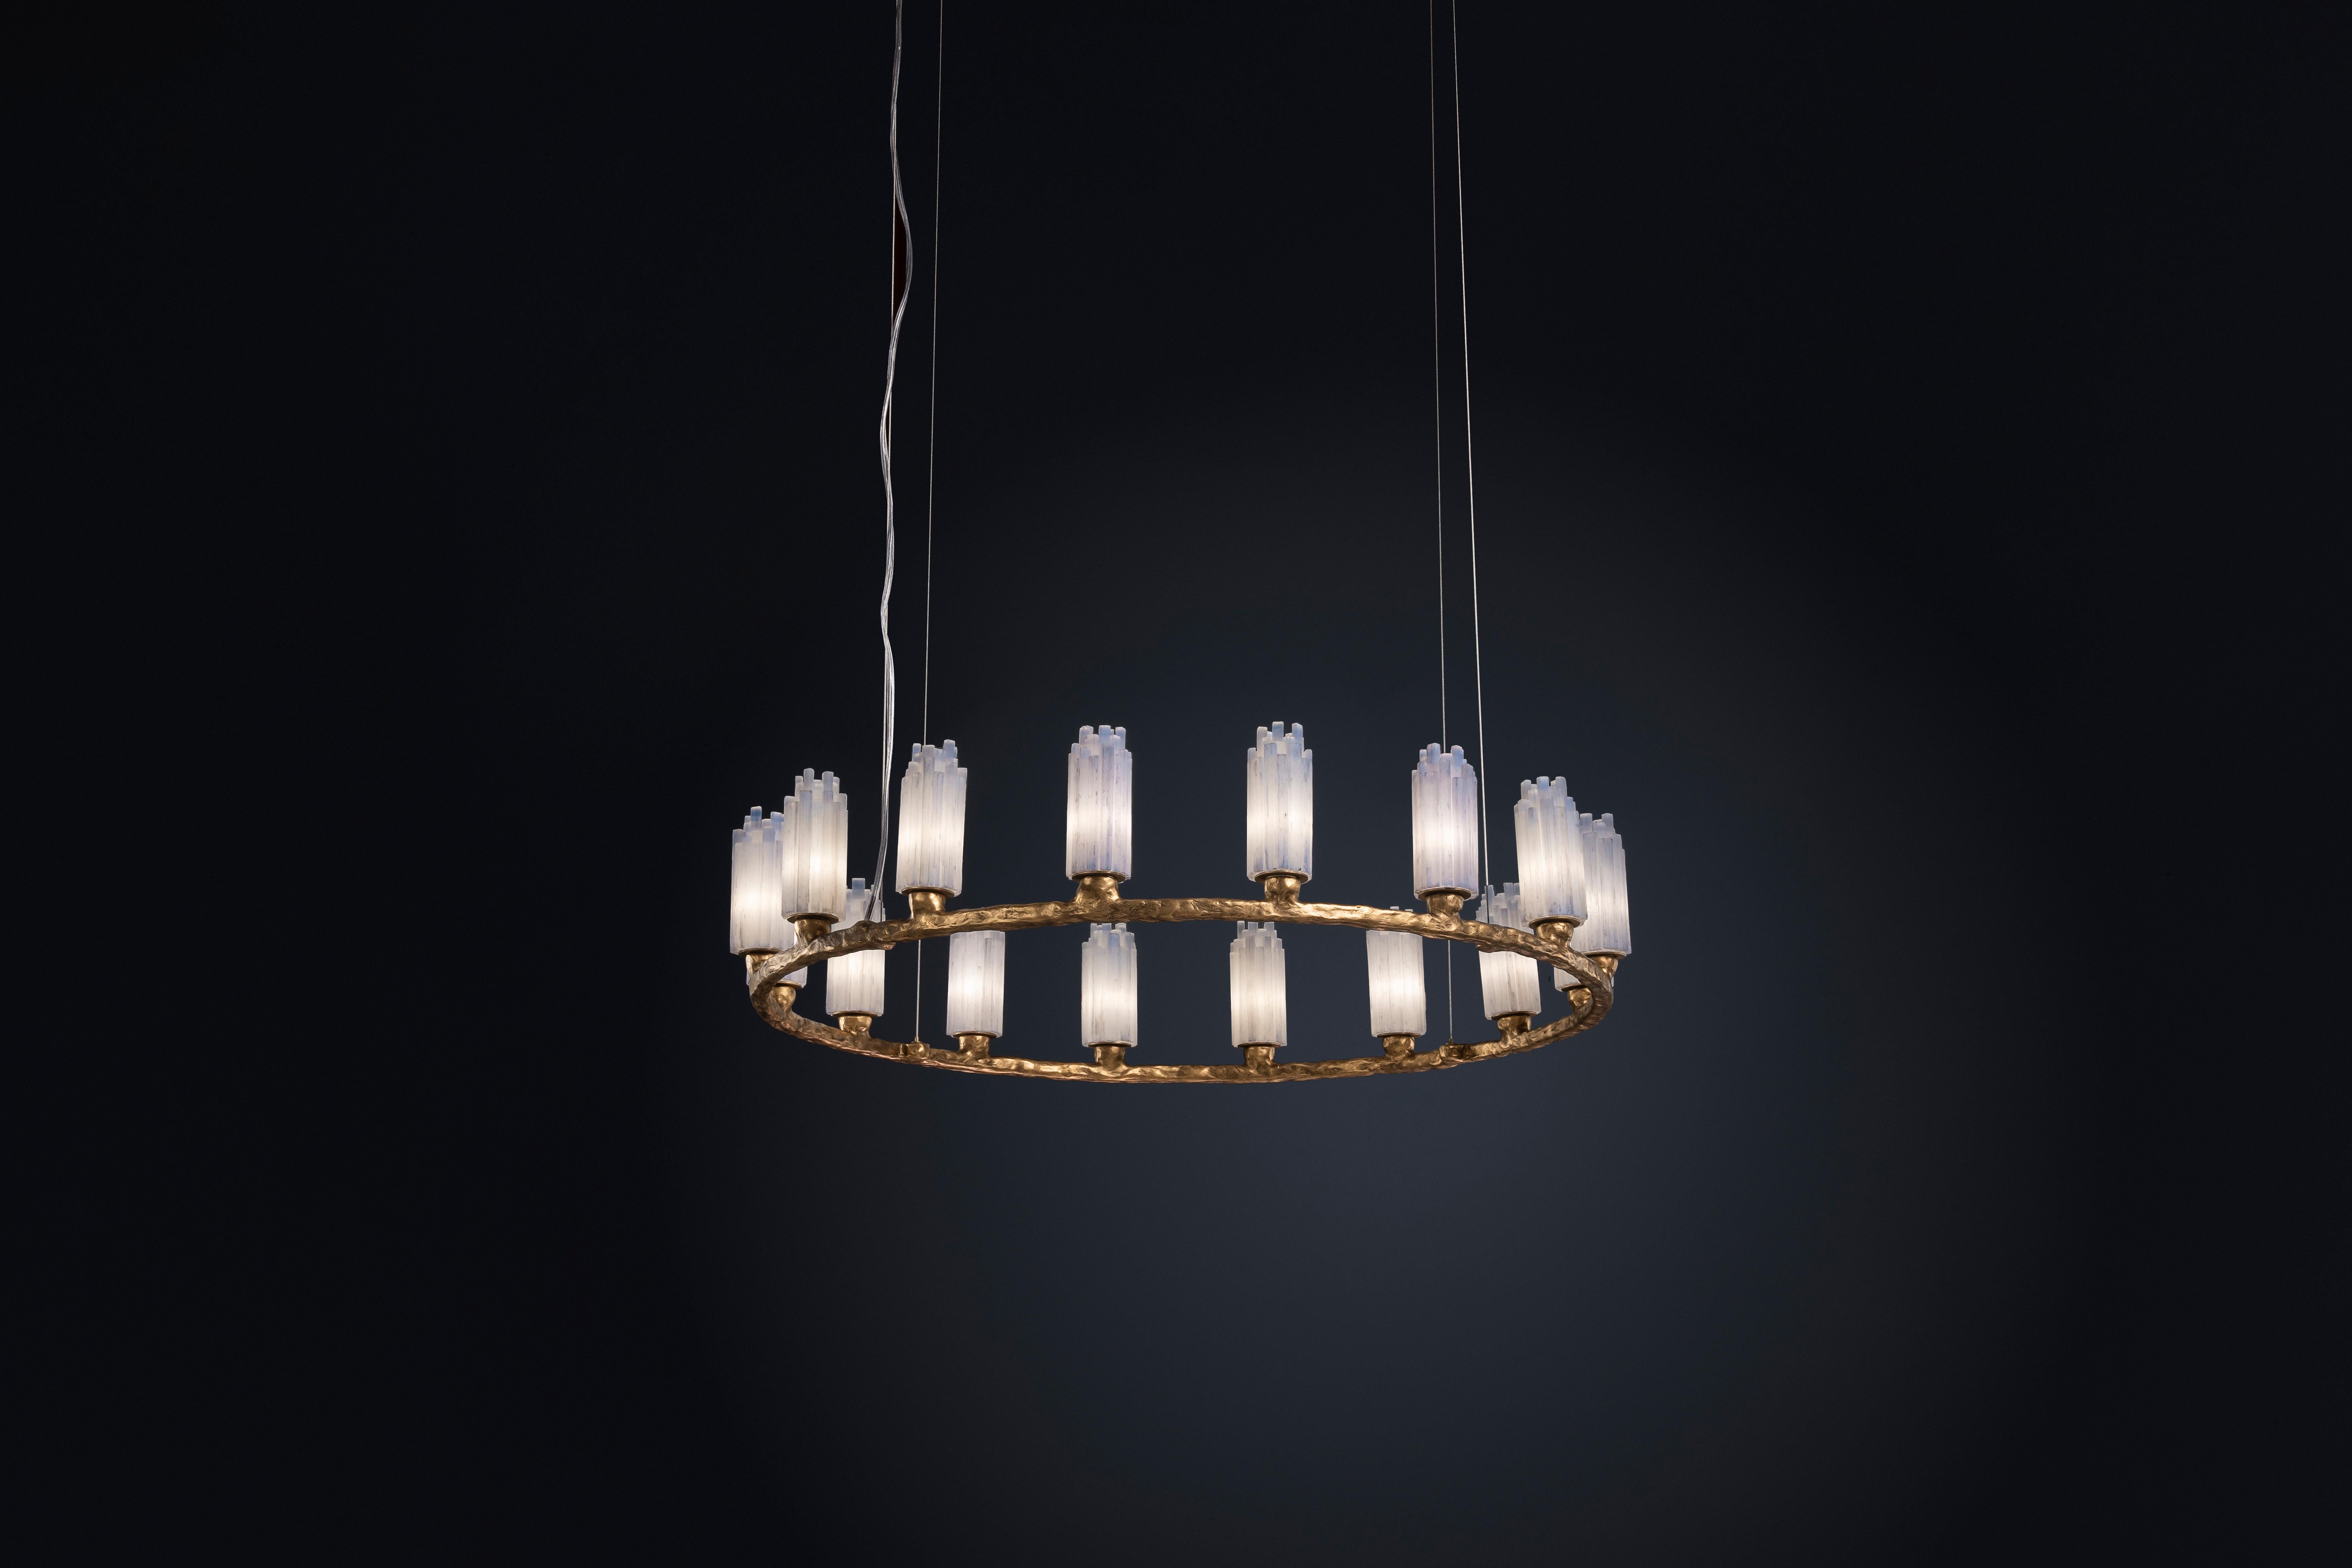 Selenite Pendant Lamp III by Aver
Dimensions: Ø 83 x H 16.5 cm.
Materials: Metal, selenite.

Different finishes available: Rustic Bronze, Vintage Gold, Aged Copper Veneer, Onyx Veneer, Gold Veneer, Bronze Gold Veneer, Aged Gold Veneer, Smoked Gold